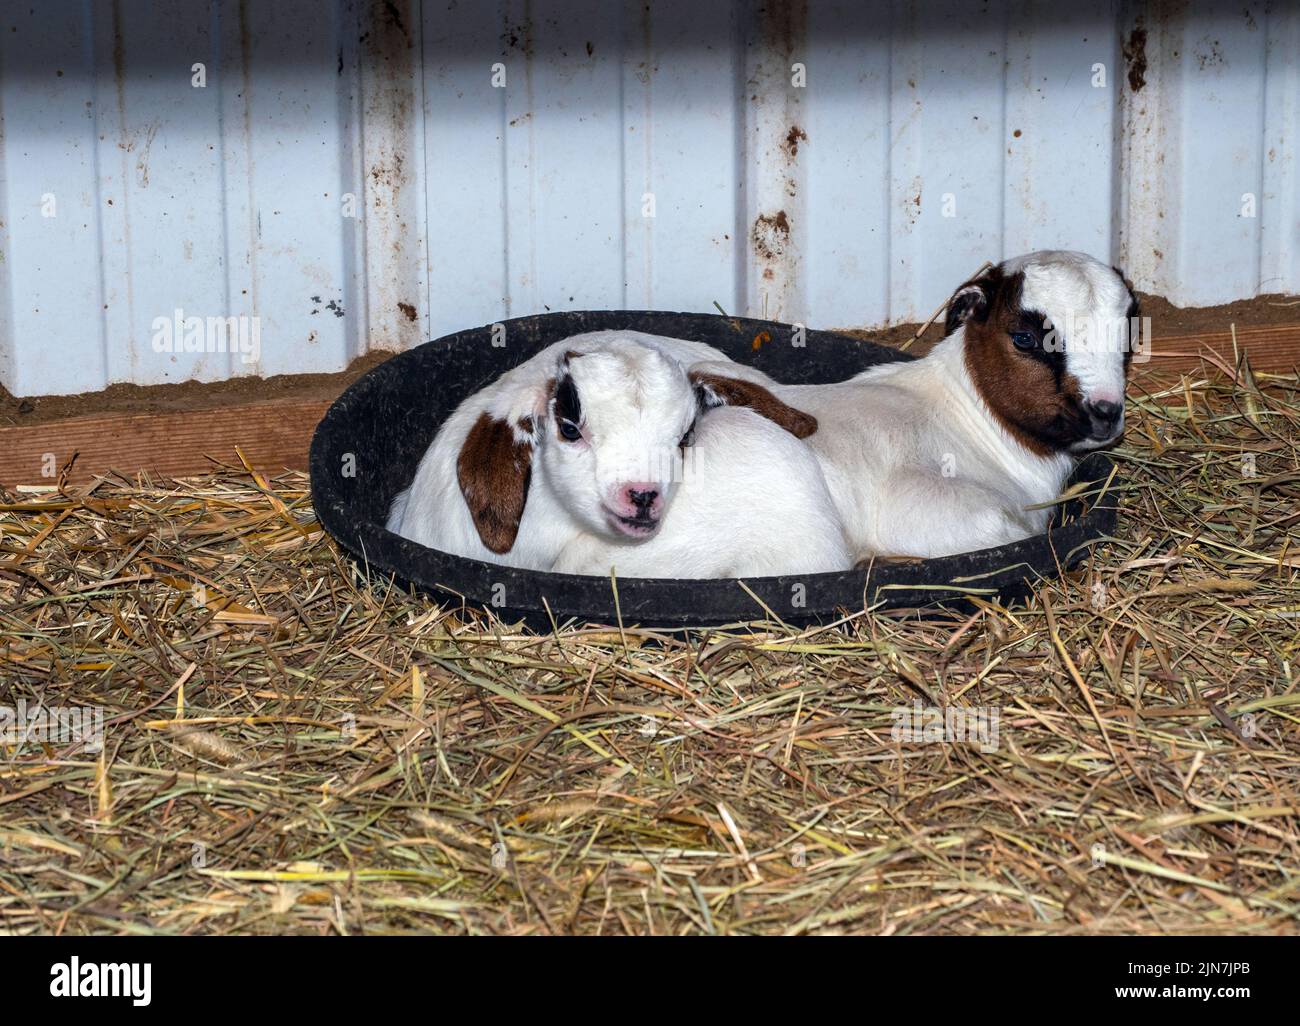 These two twin baby goats cuddle together for some rest time in their feed bowl in the barn. One twin is long eared and one is short eared. Good adver Stock Photo